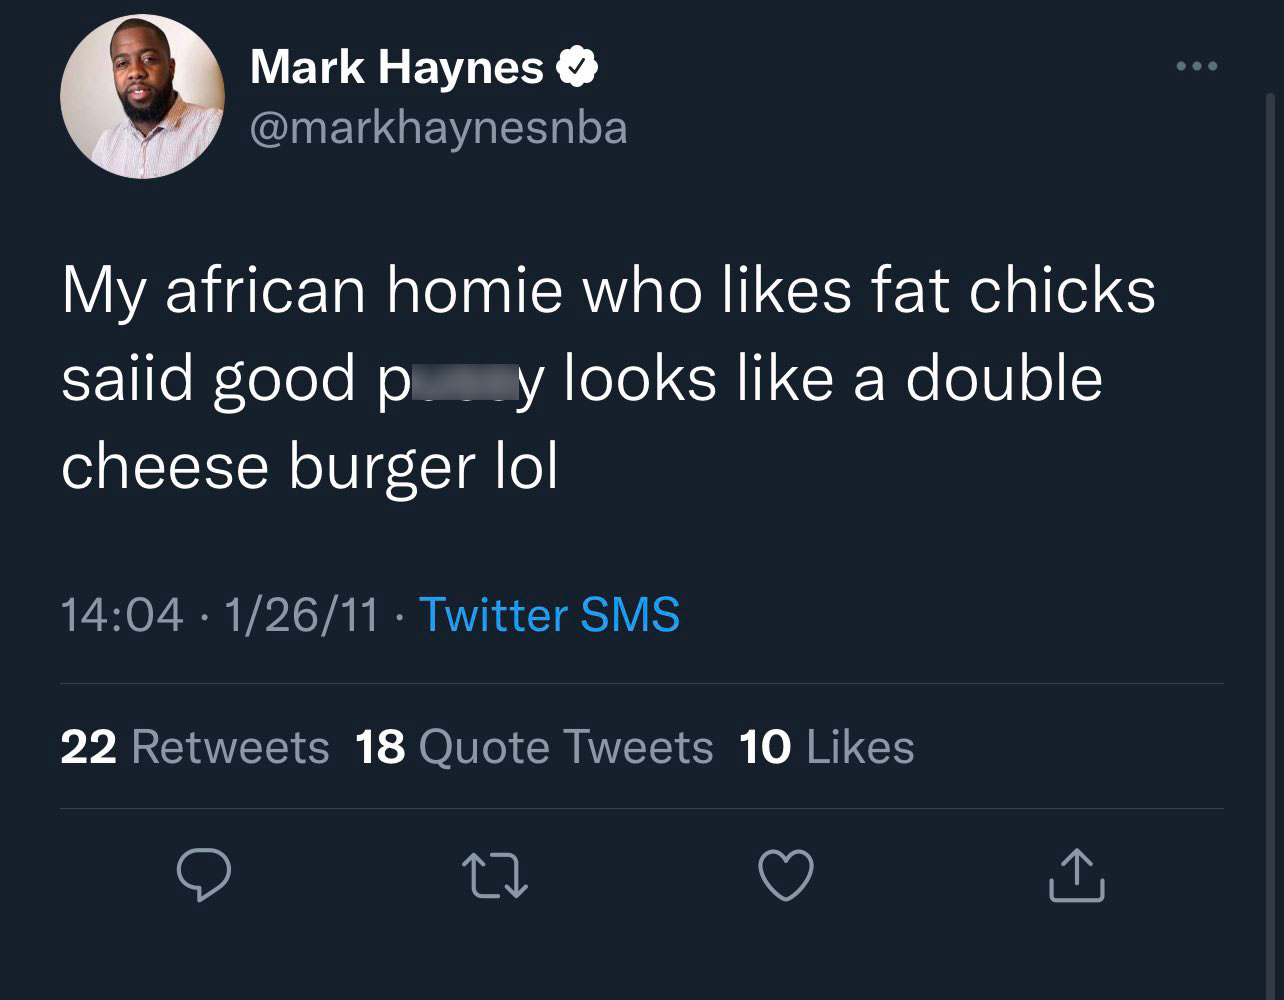 Mark Haynes NBA tweets - disney may the 4th tweet - Mark Haynes My african homie who fat chicks saiid good pussy looks a double cheese burger lol 12611. Twitter Sms 22 18 Quote Tweets 10 27